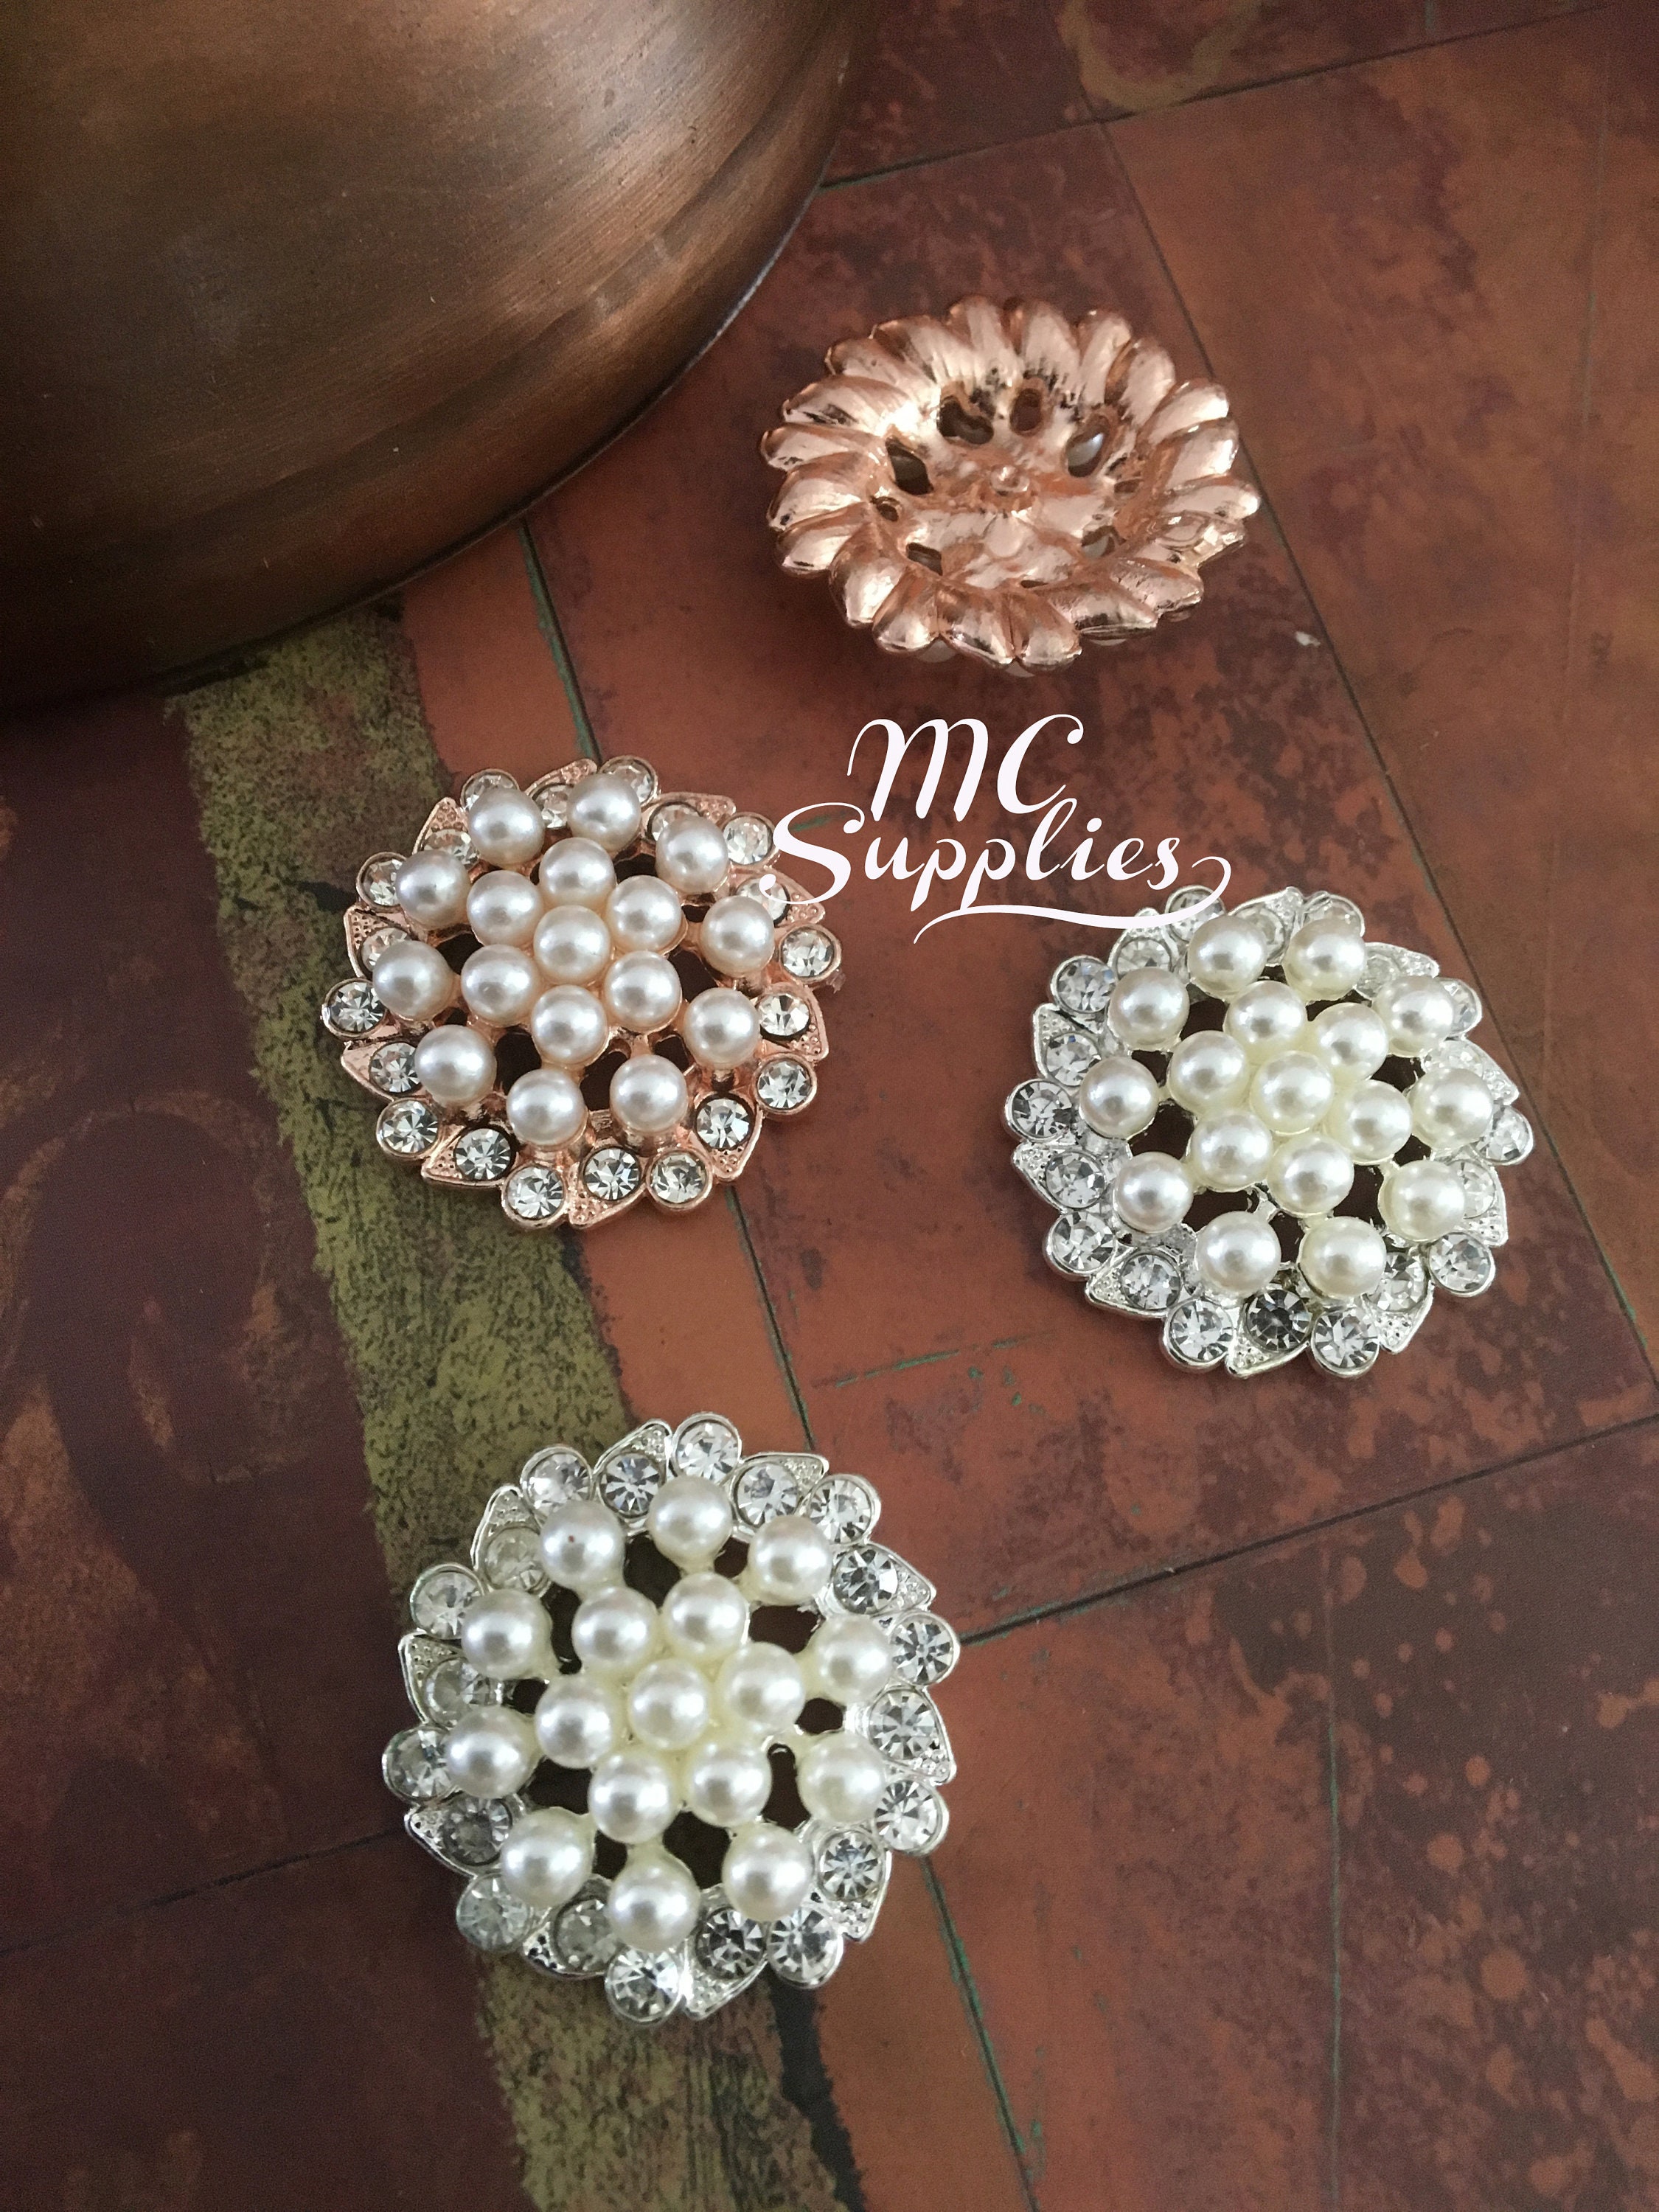 10 Pcs,shank Buttons,round Buttons,rhinestone Pearls,pearl Rhinestones,rhinestone  Center,flower Center,metal Rhinestones,pearl Buttons,48 